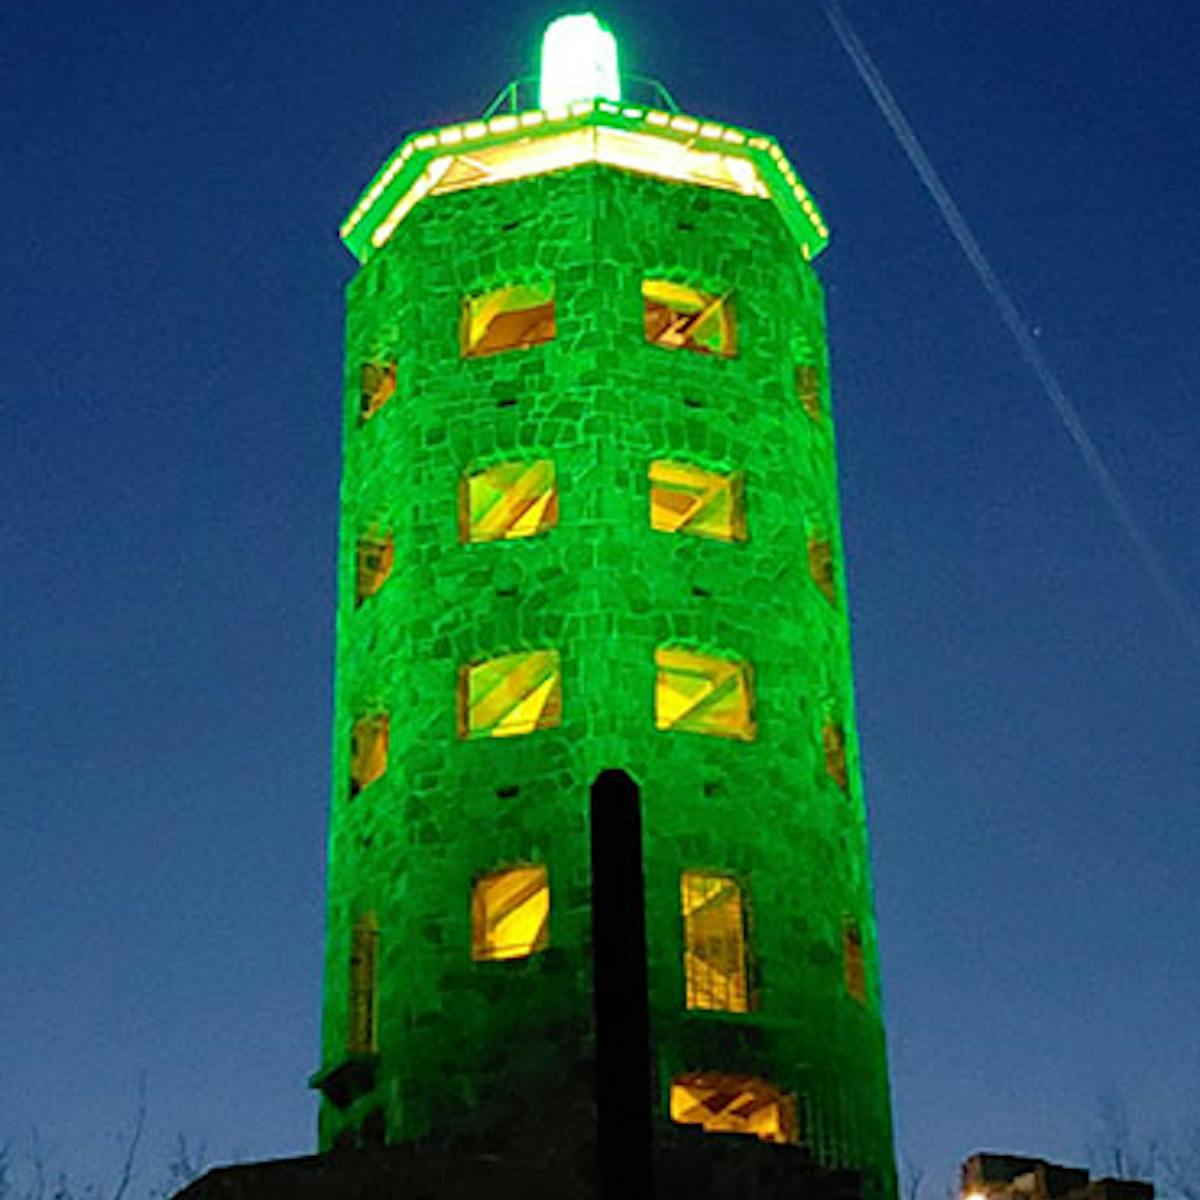 Enger Tower lit up at night using ControlBright